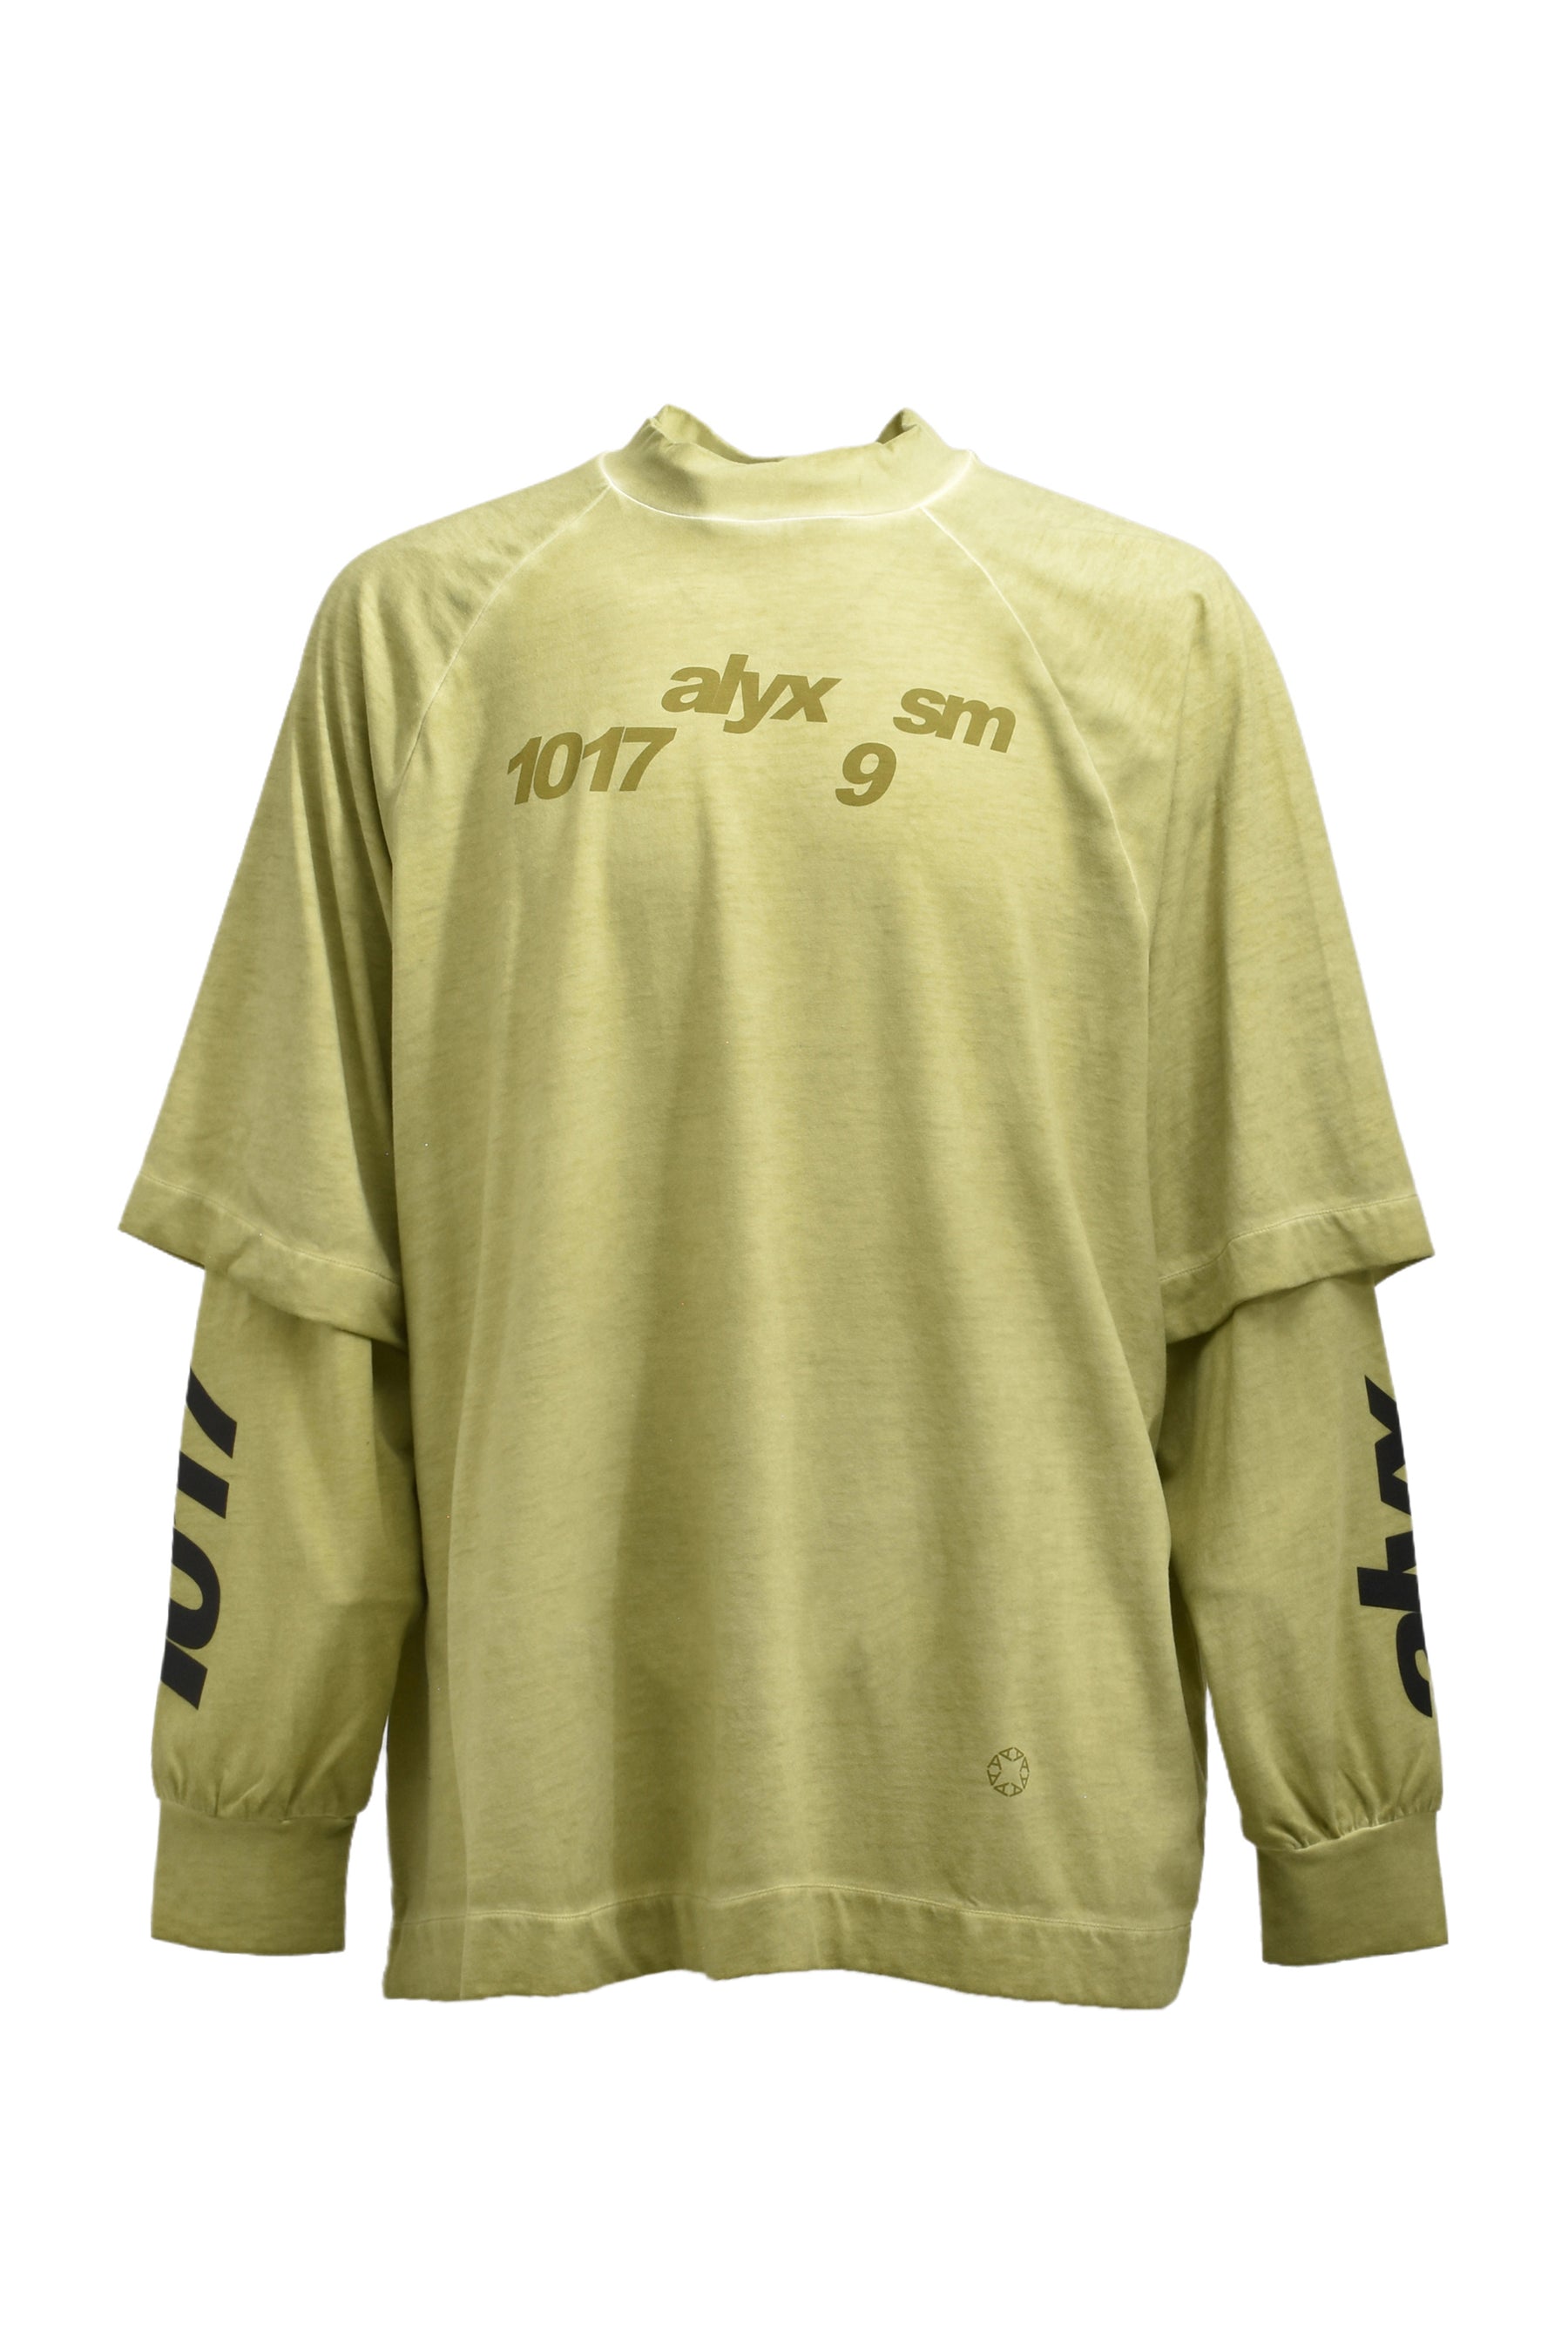 1017 ALYX 9SM アリクス SS24 GRAPHIC DOUBLE SLEEVE TEE / SAGE GRN 